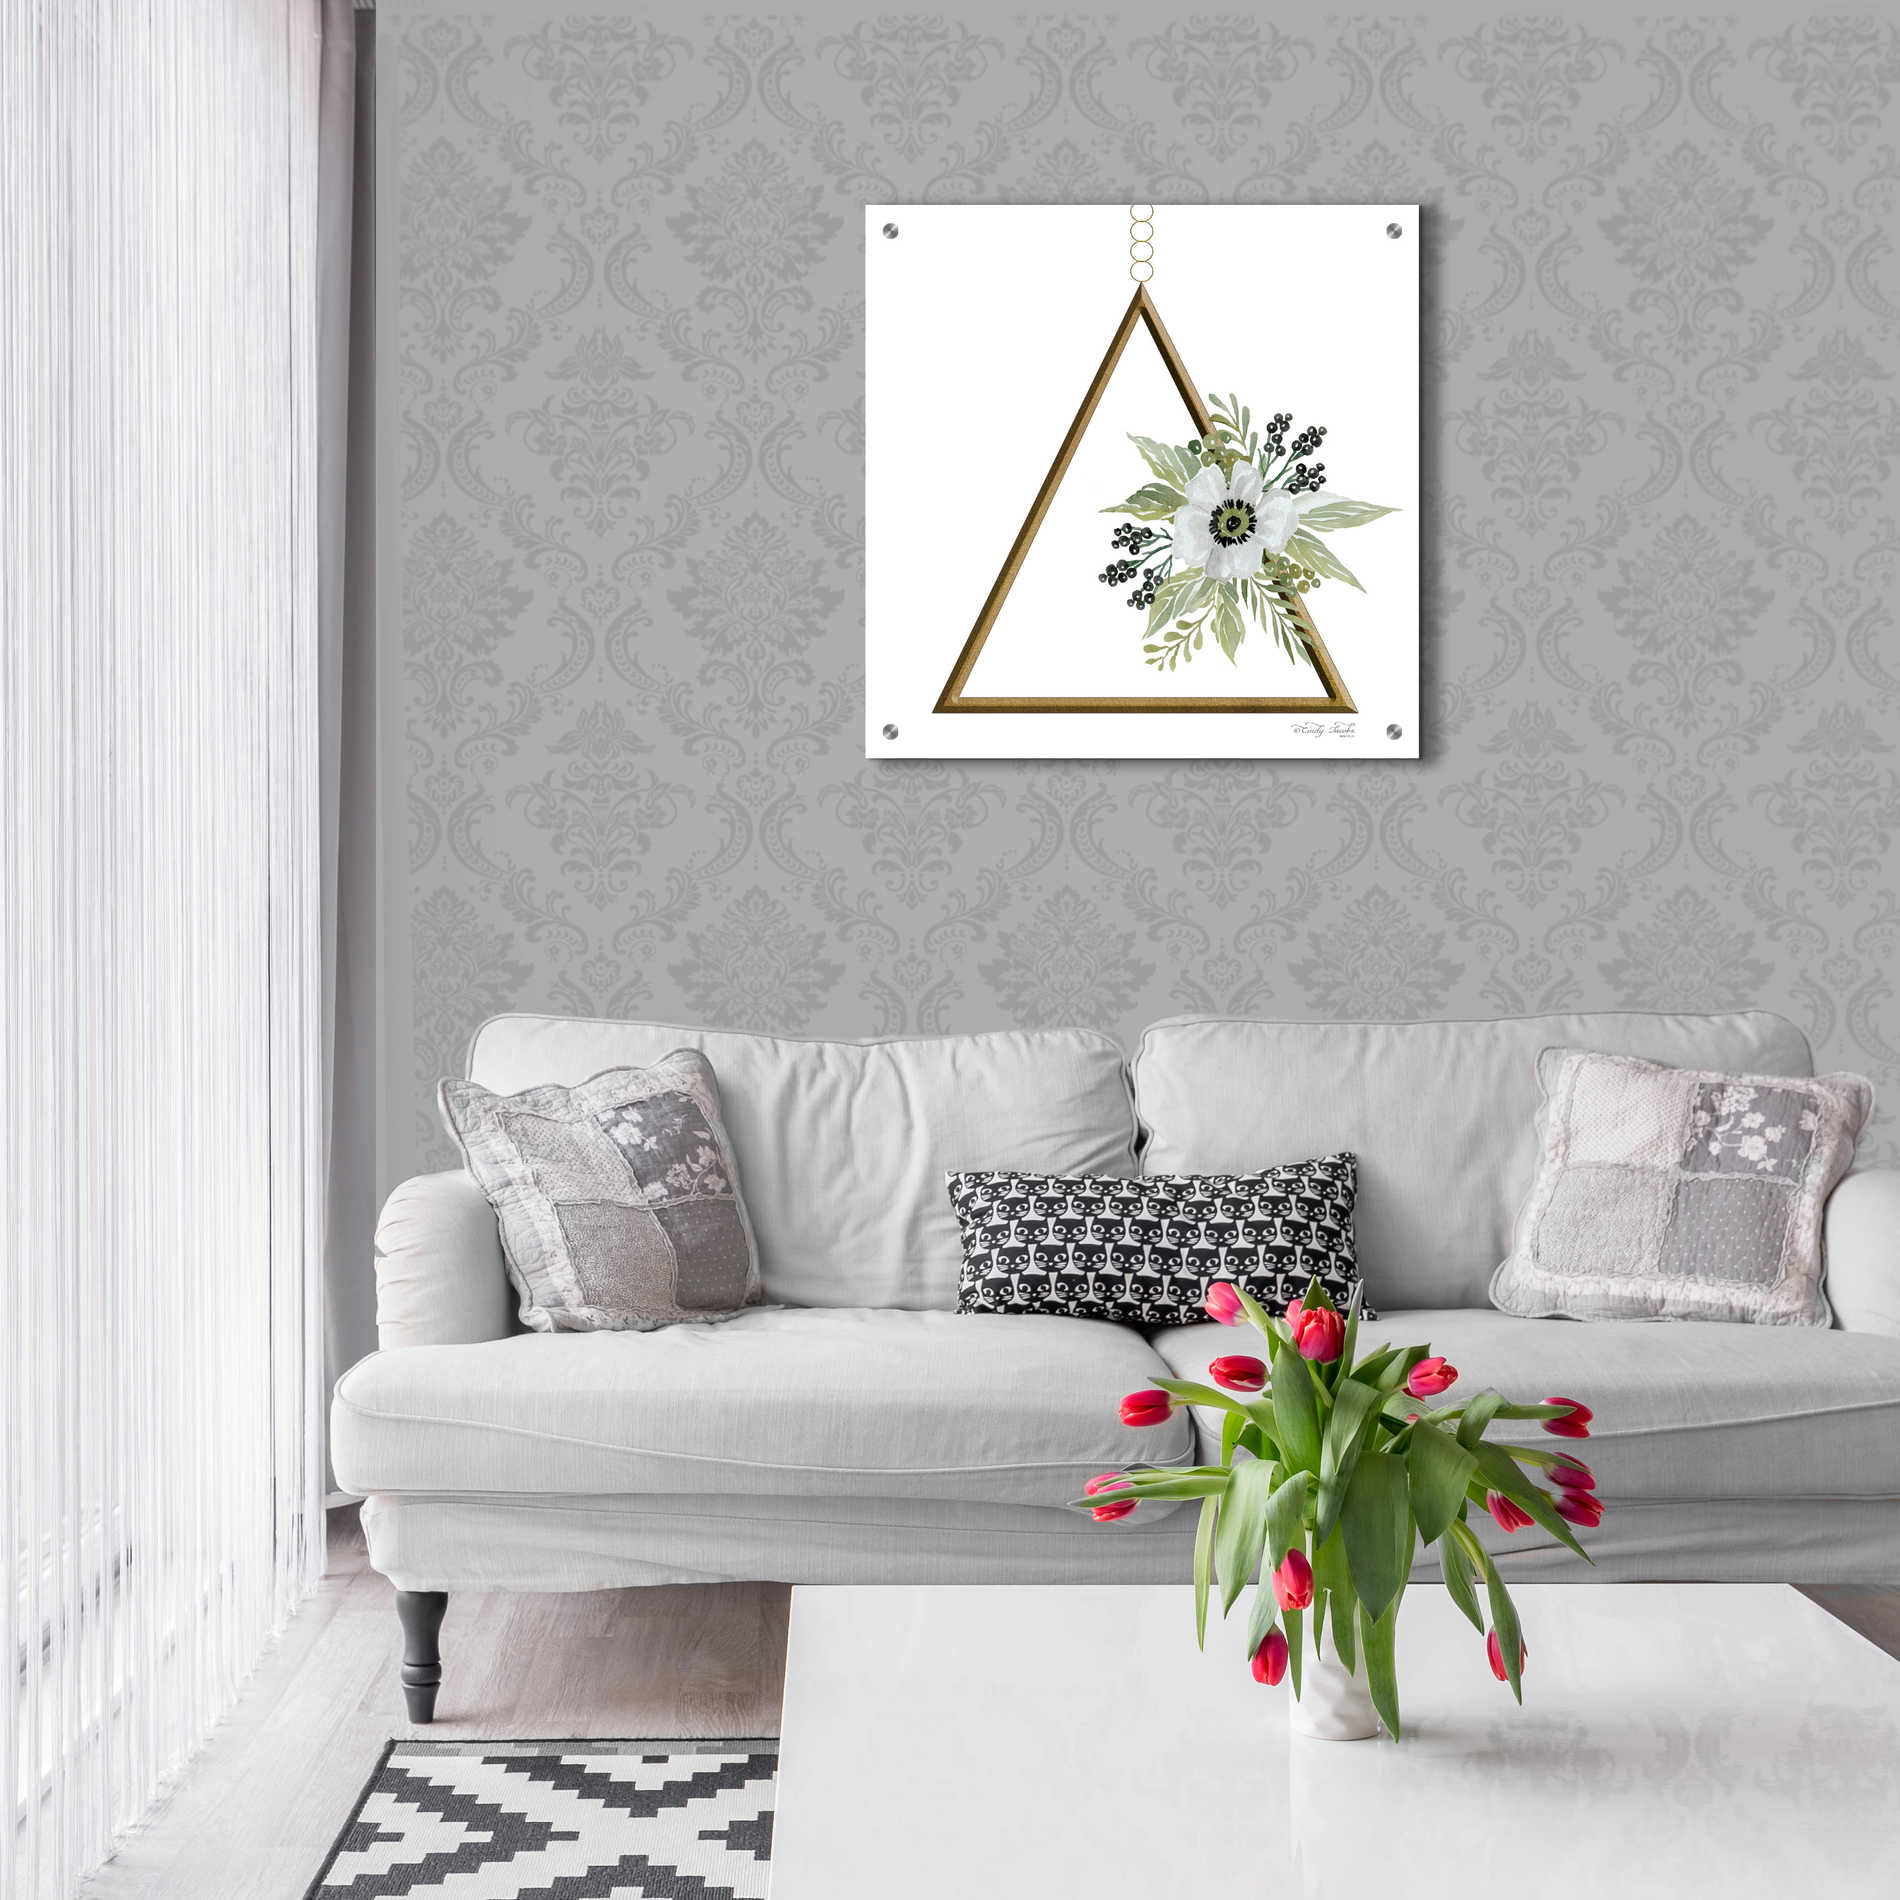 Epic Art 'Geometric Triangle Muted Floral II' by Cindy Jacobs, Acrylic Glass Wall Art,24x24